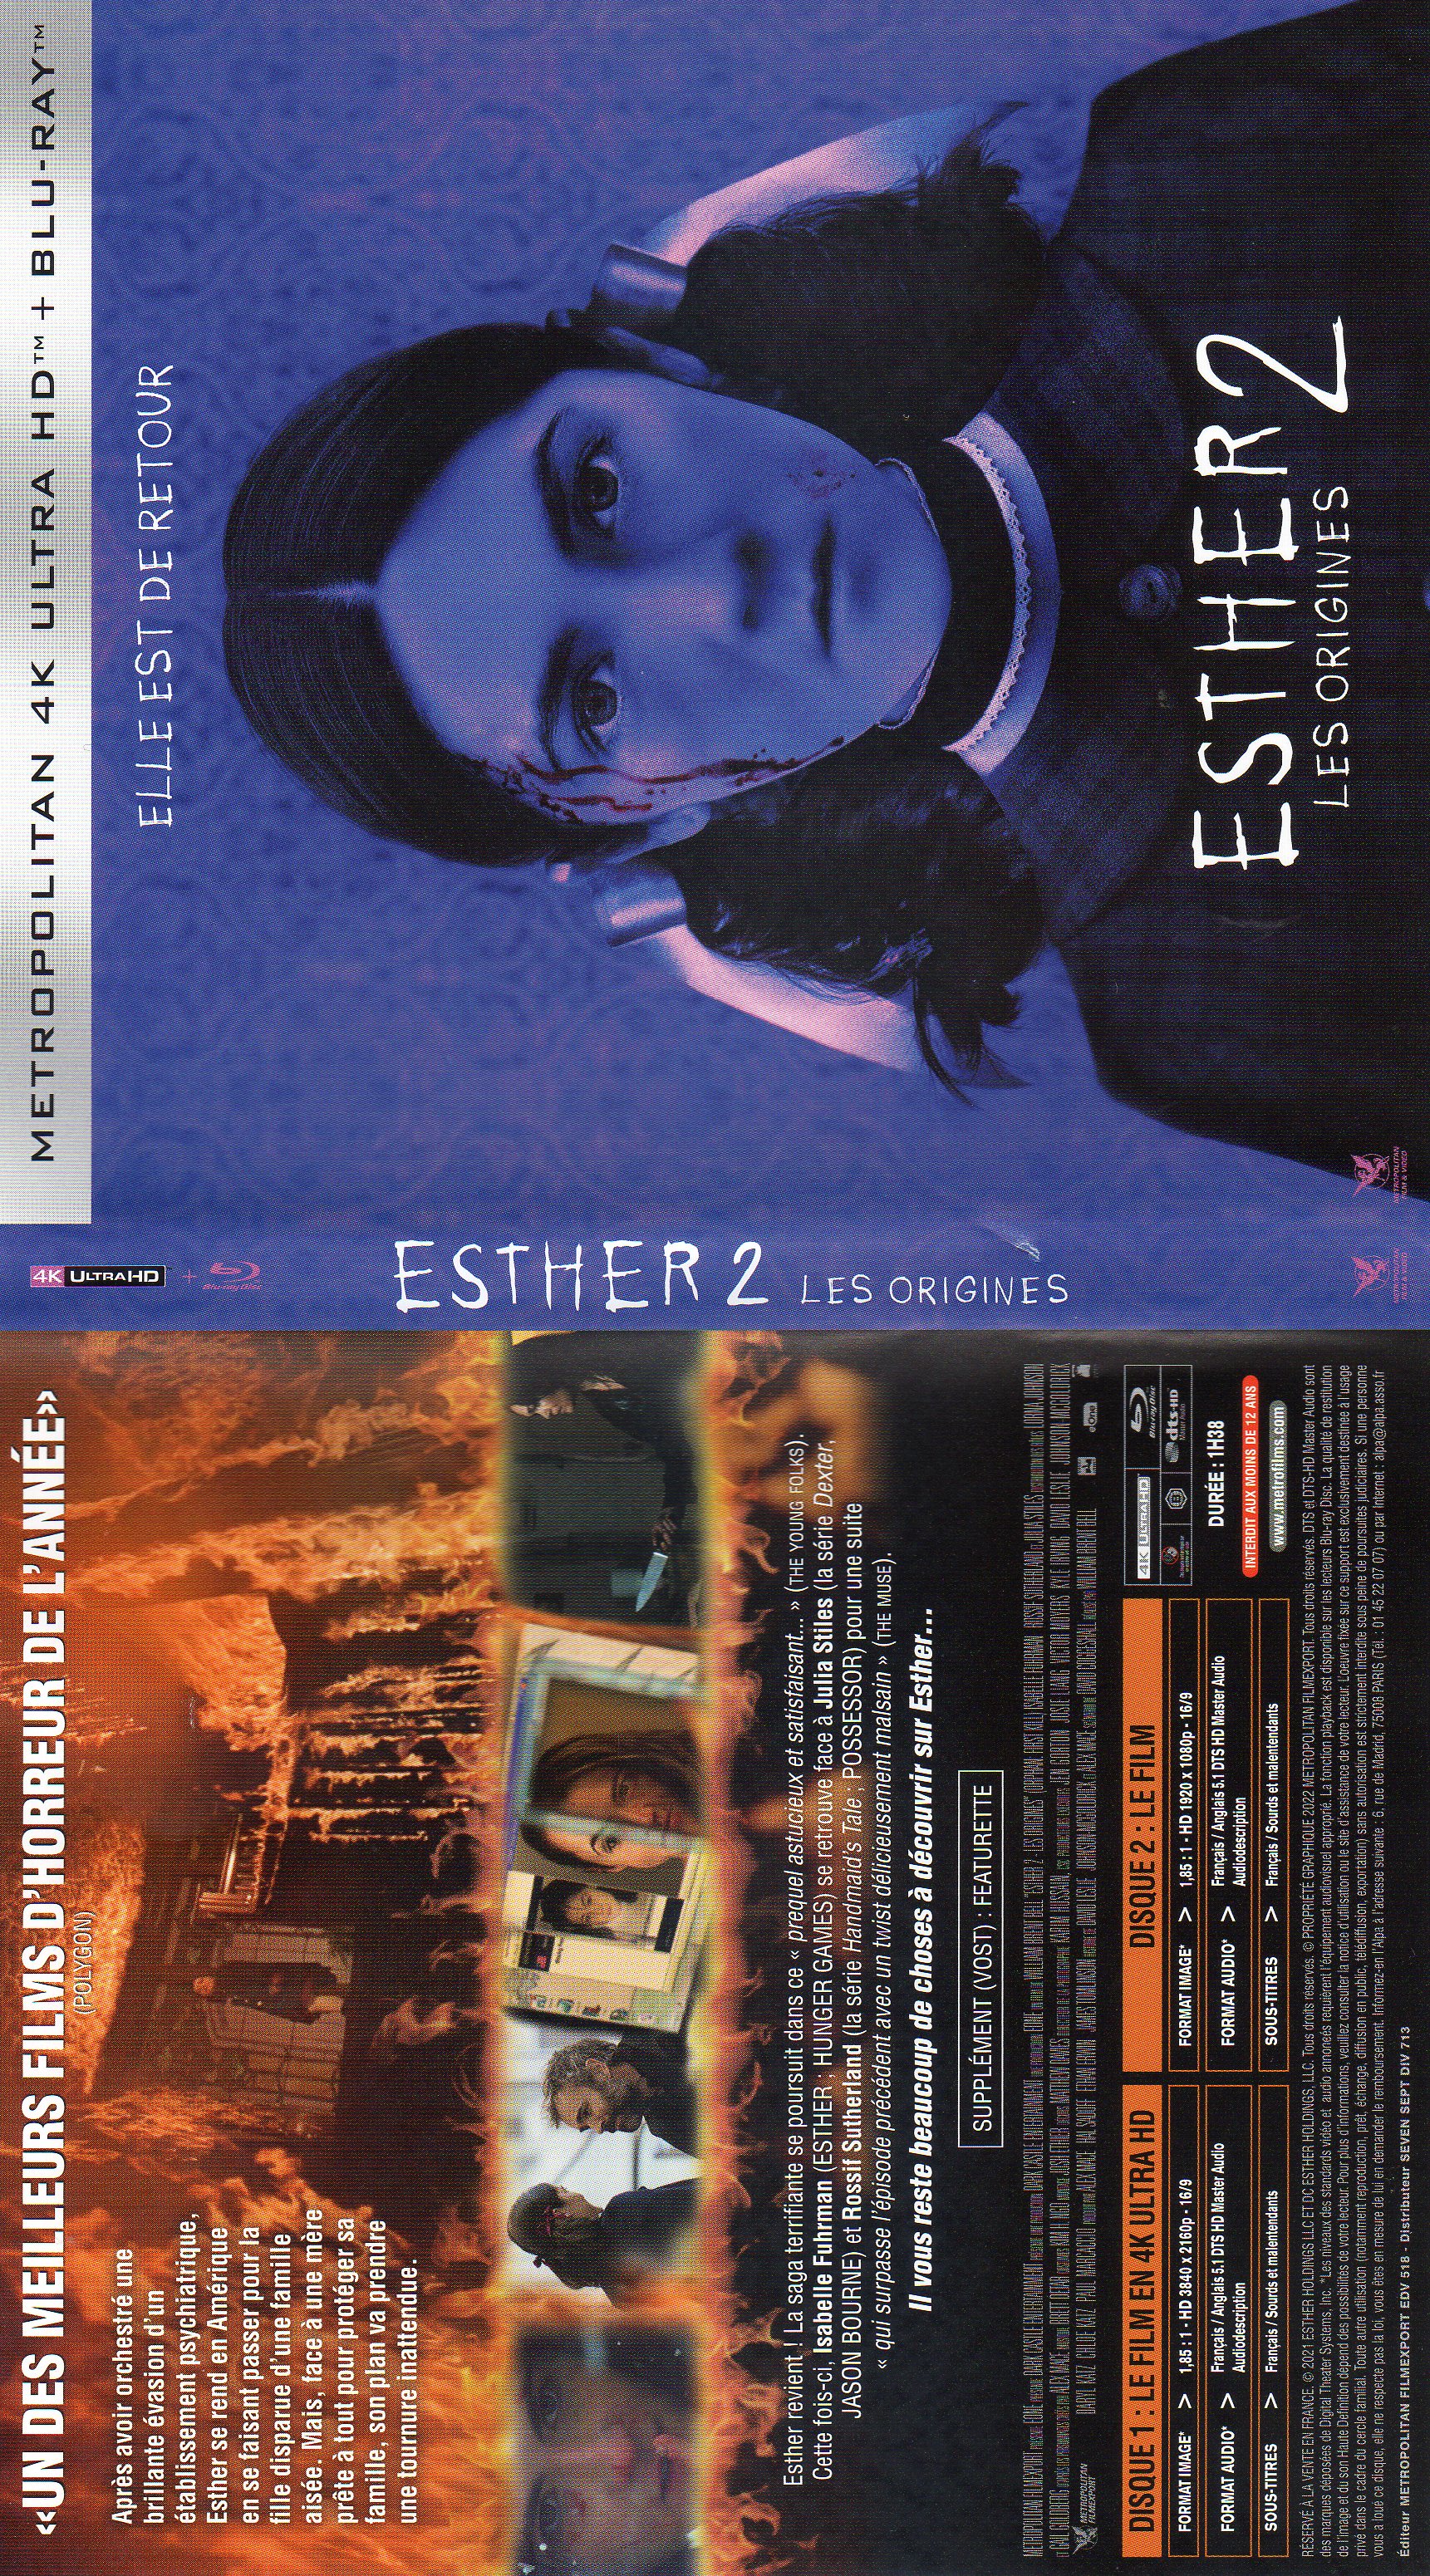 Jaquette DVD Esther 2 (BLU-RAY)